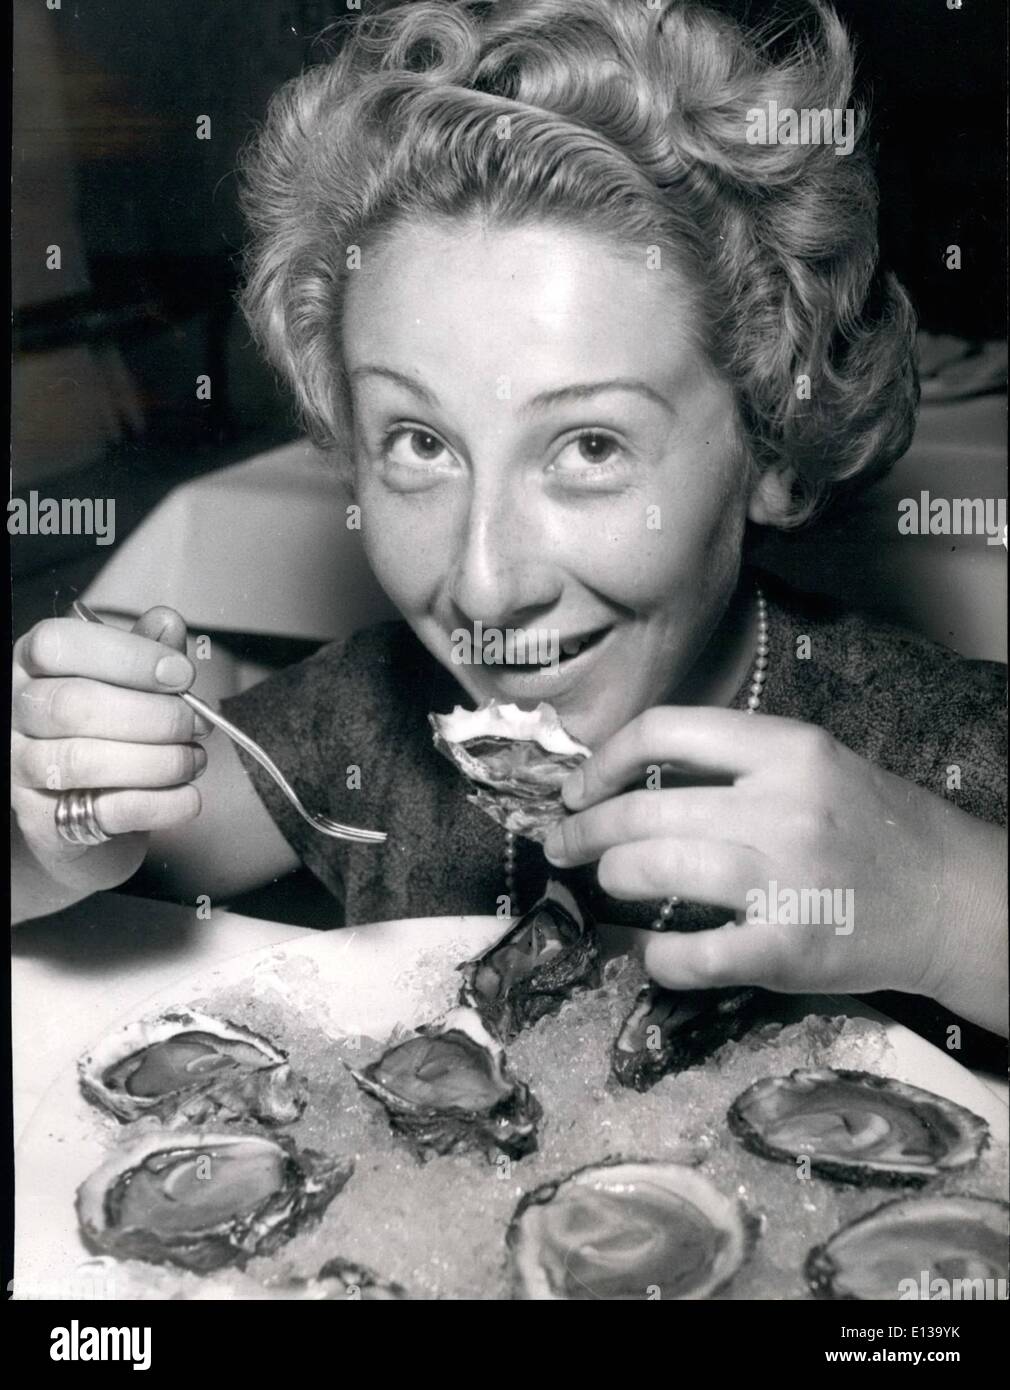 Feb. 29, 2012 - THE BEGINNING OF THE OYSTER SEASON IN FRANCE: THIS YOUNG PARISIAN LADY SEEMS TO ENJOY THE FIRST OYSTERS OF THE SEASON. Stock Photo